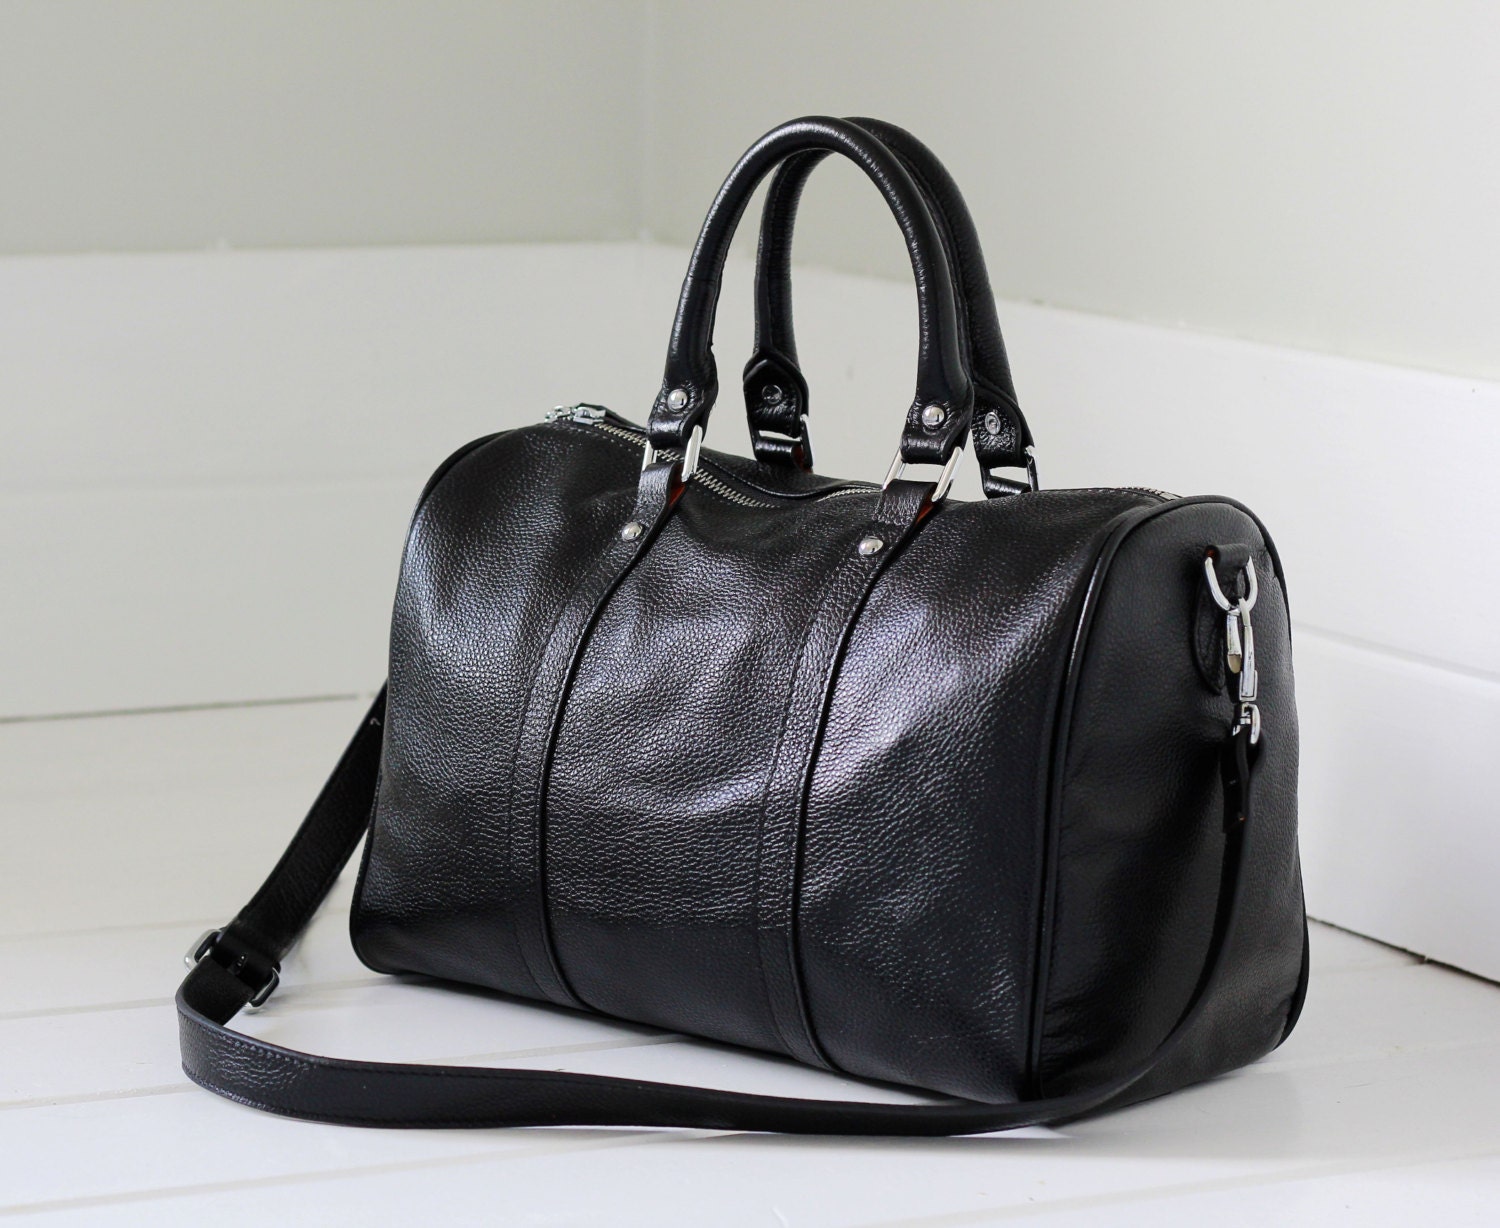 Black leather duffle bag black leather carry all by Adeleshop